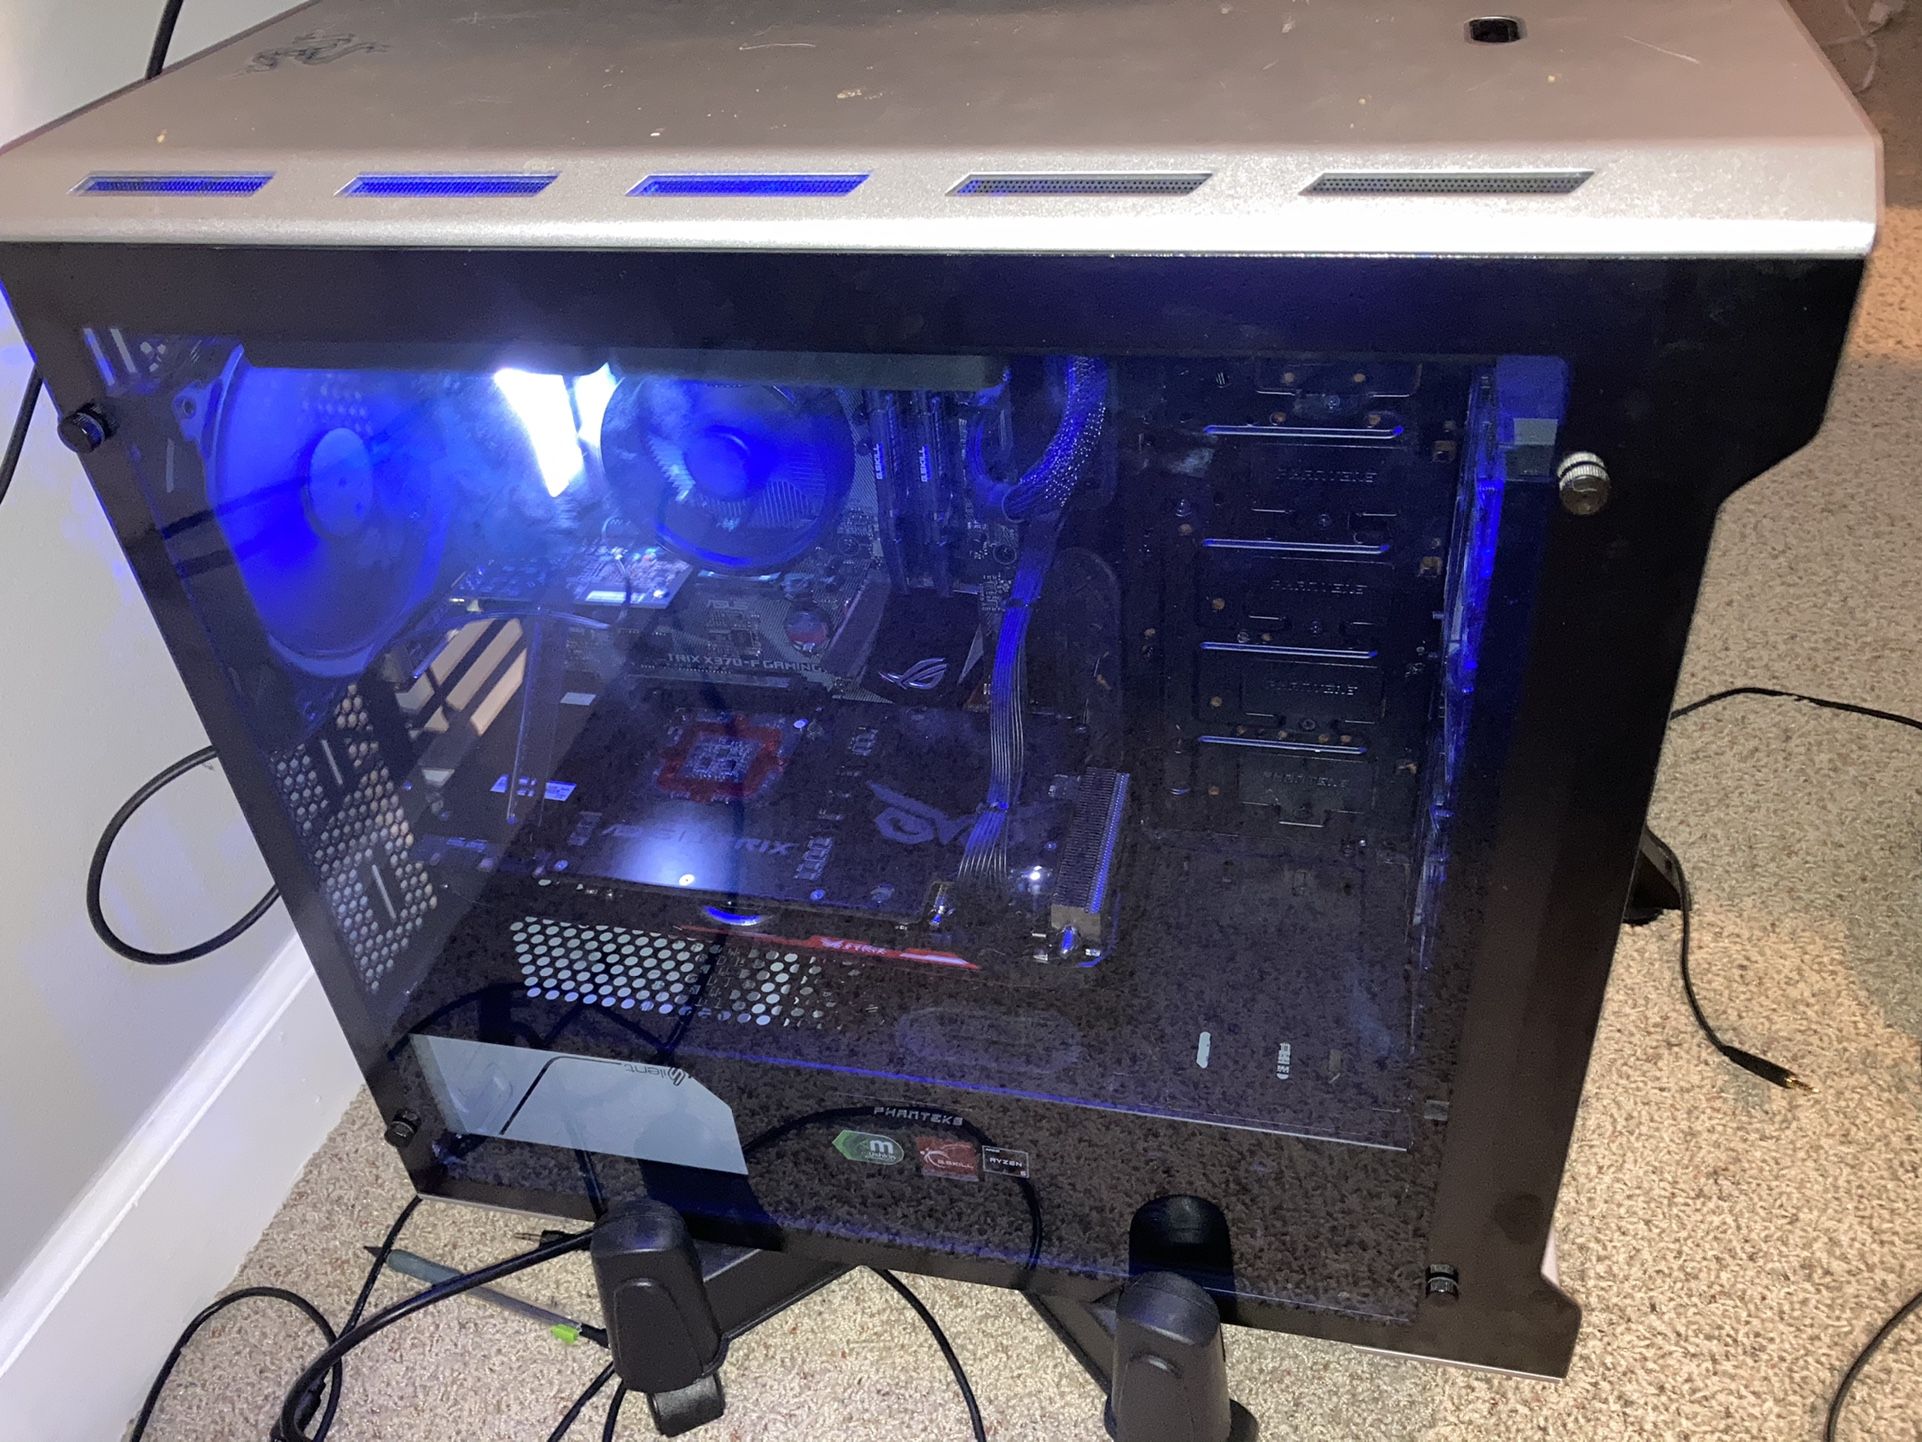 PC Tower With Power Supply and Strix X370 Motherboard